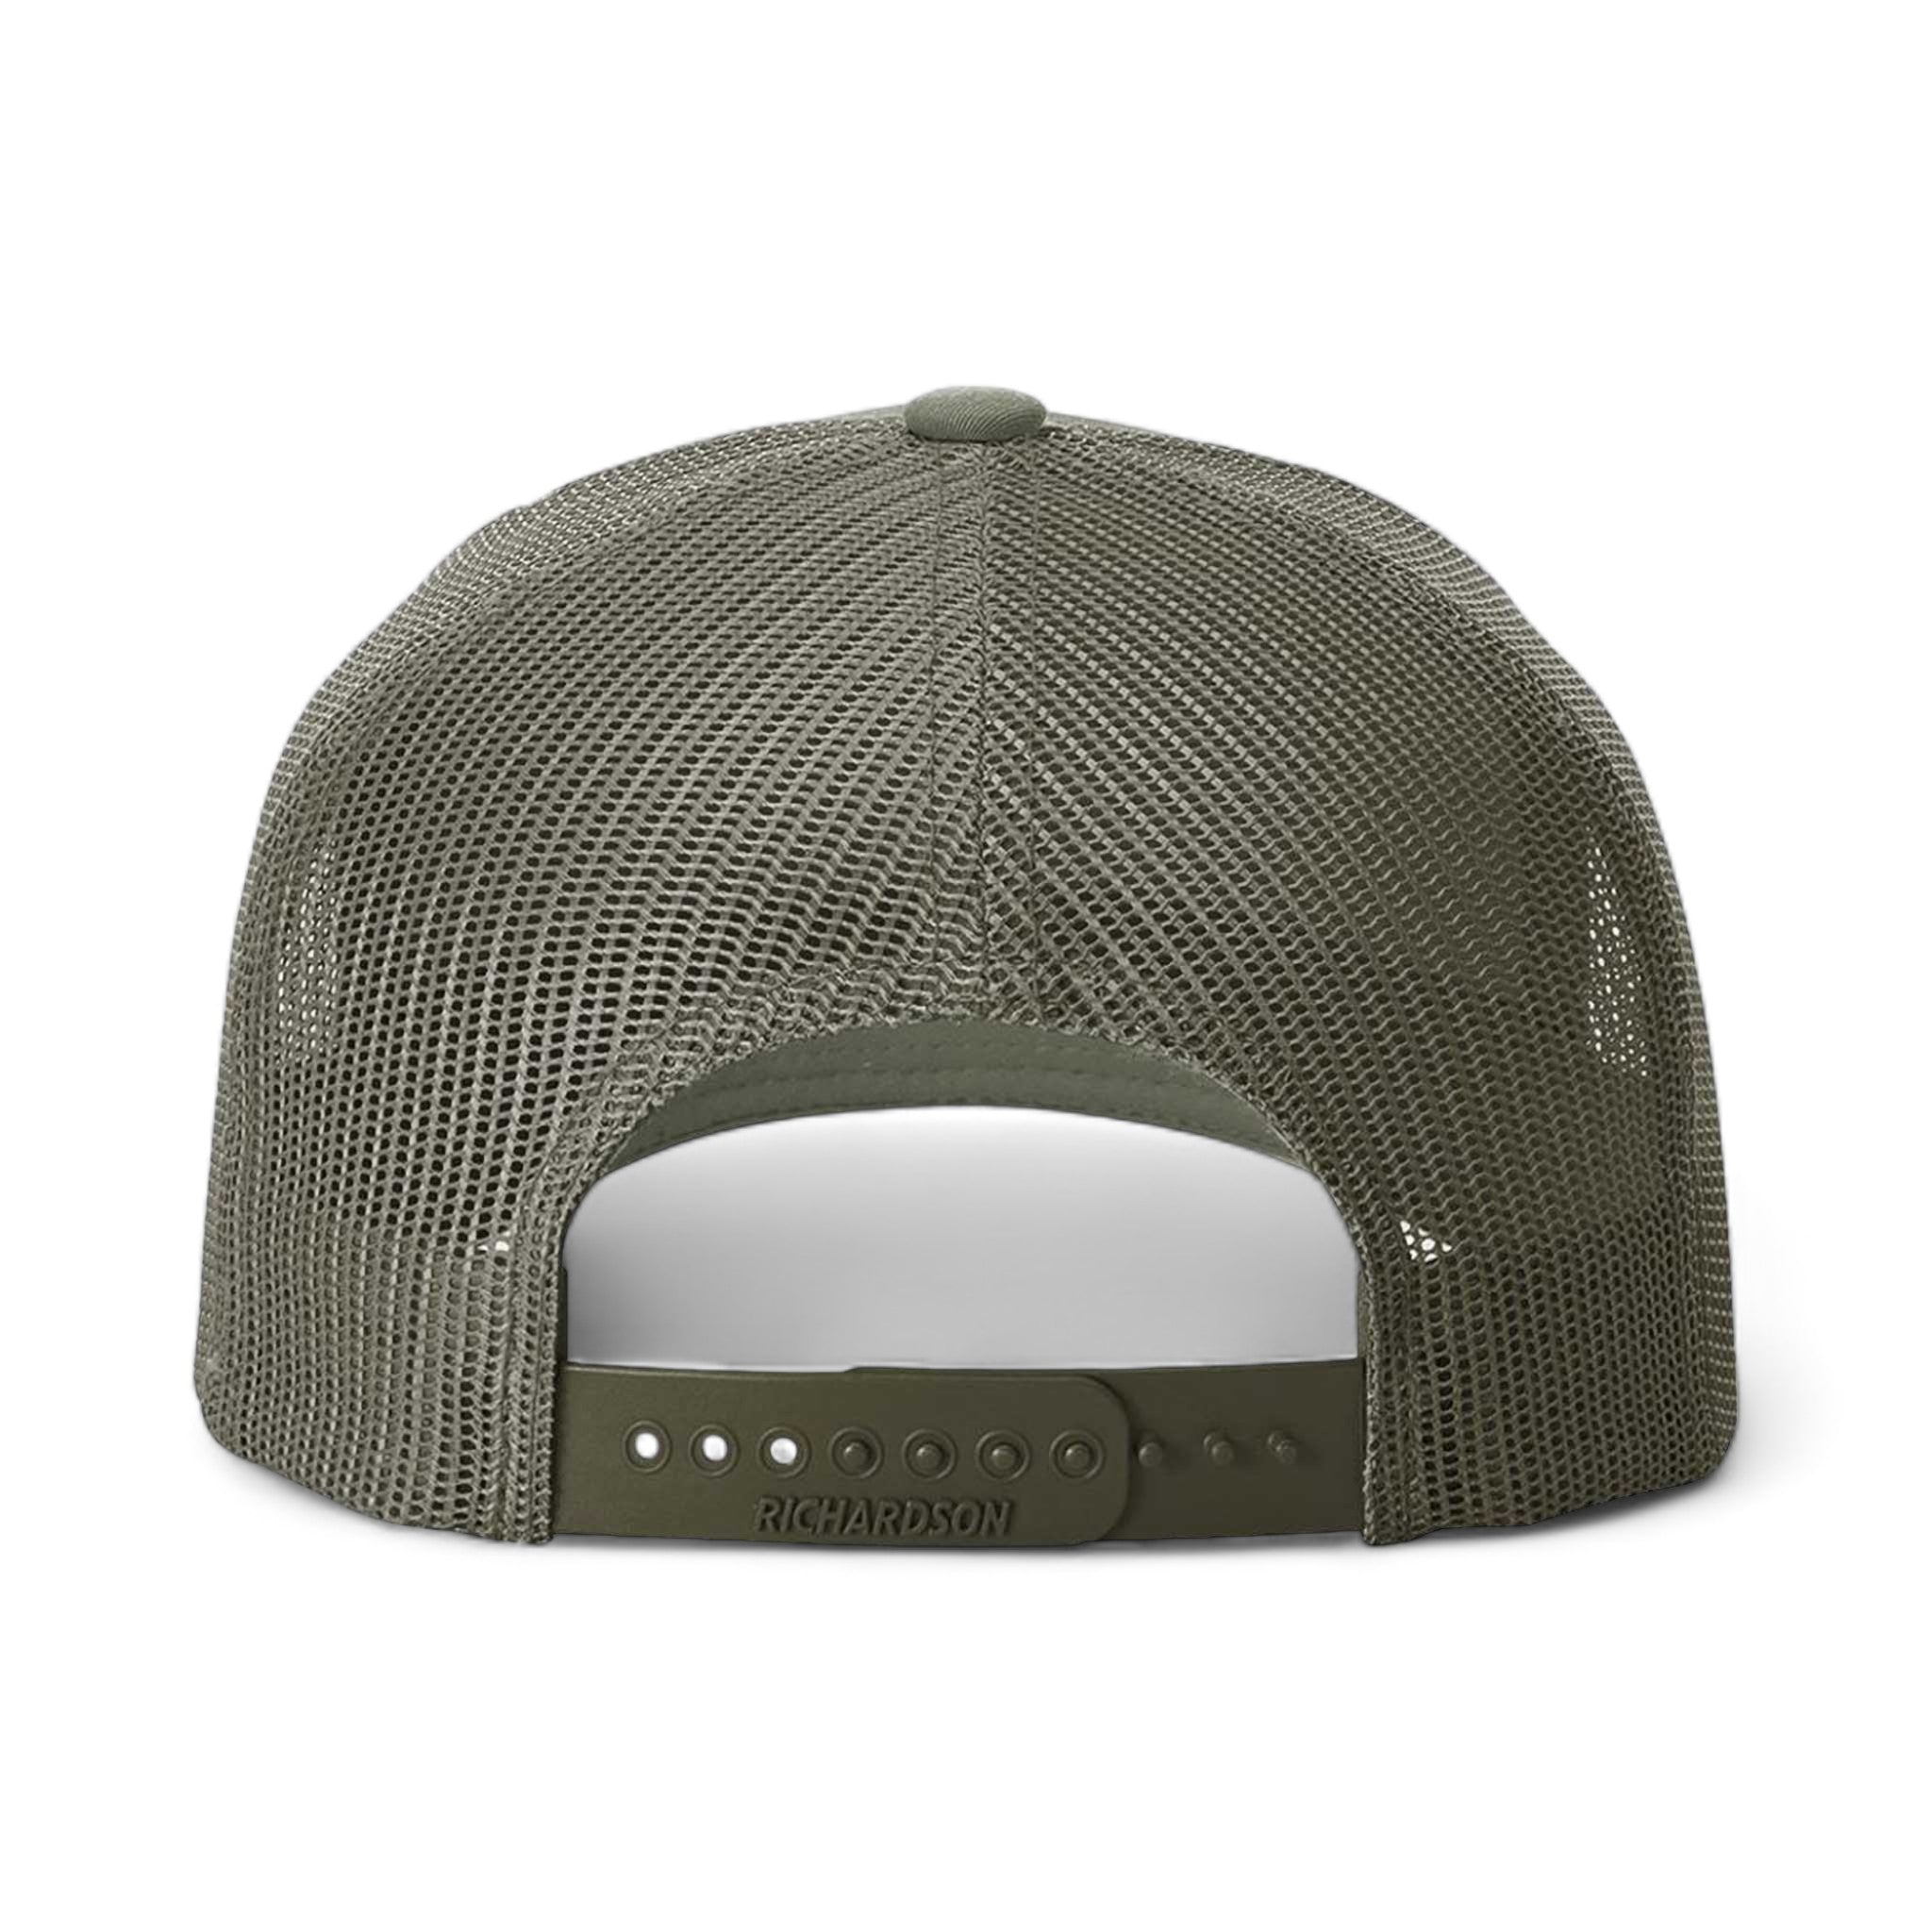 Back view of Richardson 112FPR custom hat in loden green